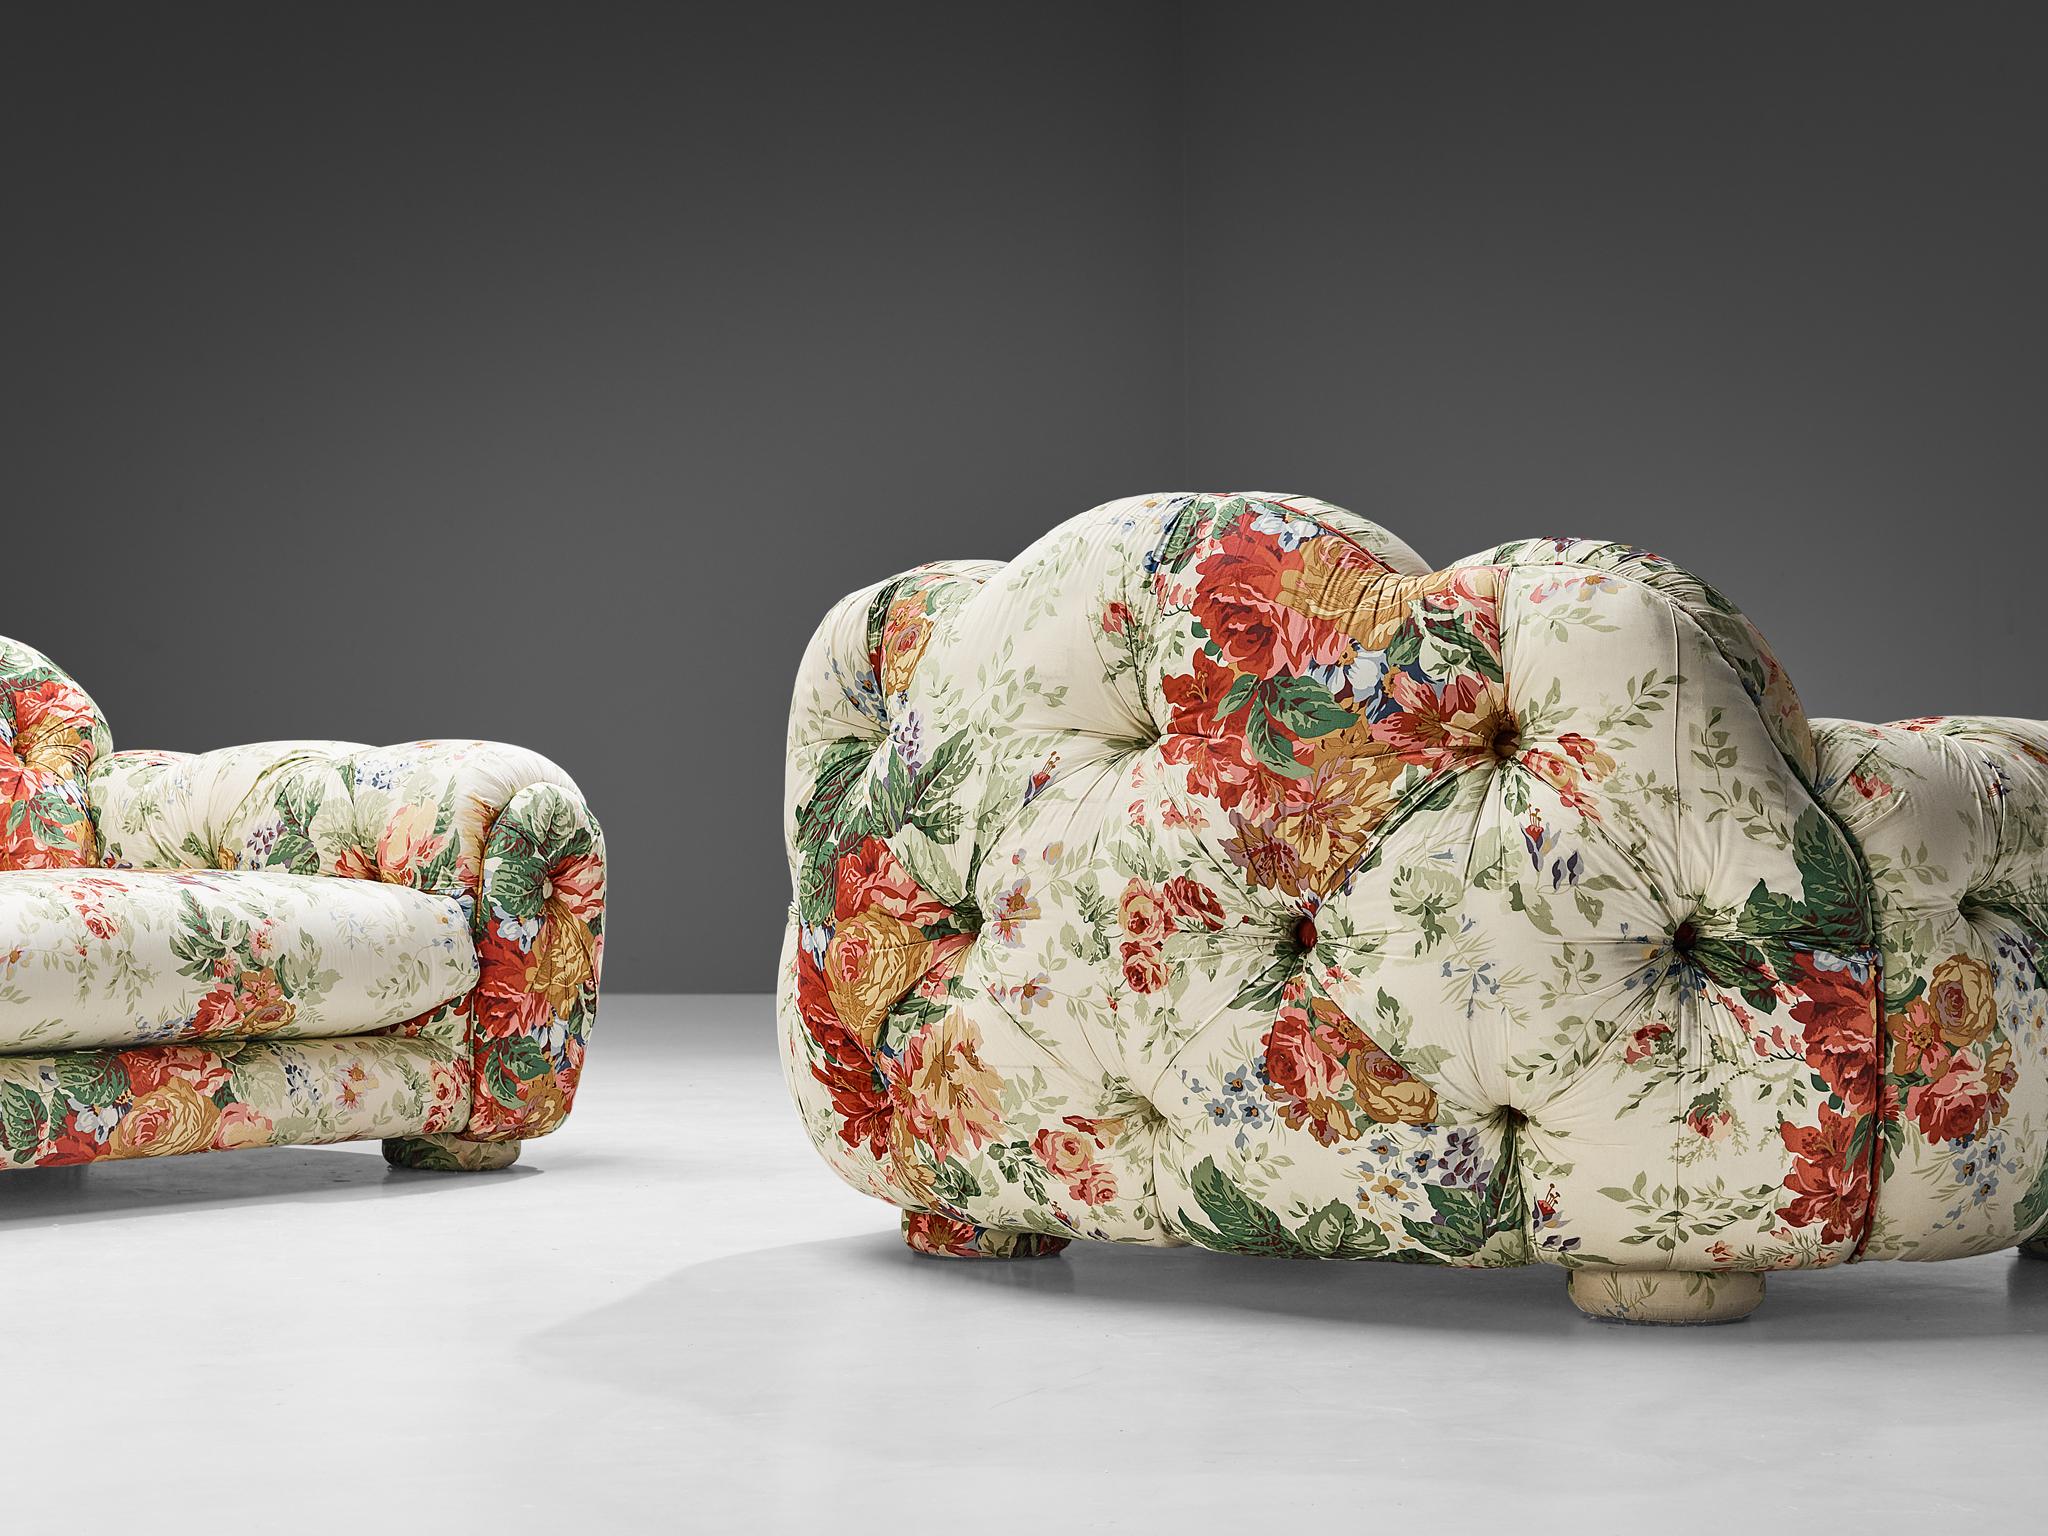 Vivai Del Sud 'Superstar' Lounge Chair in Floral Upholstery 5